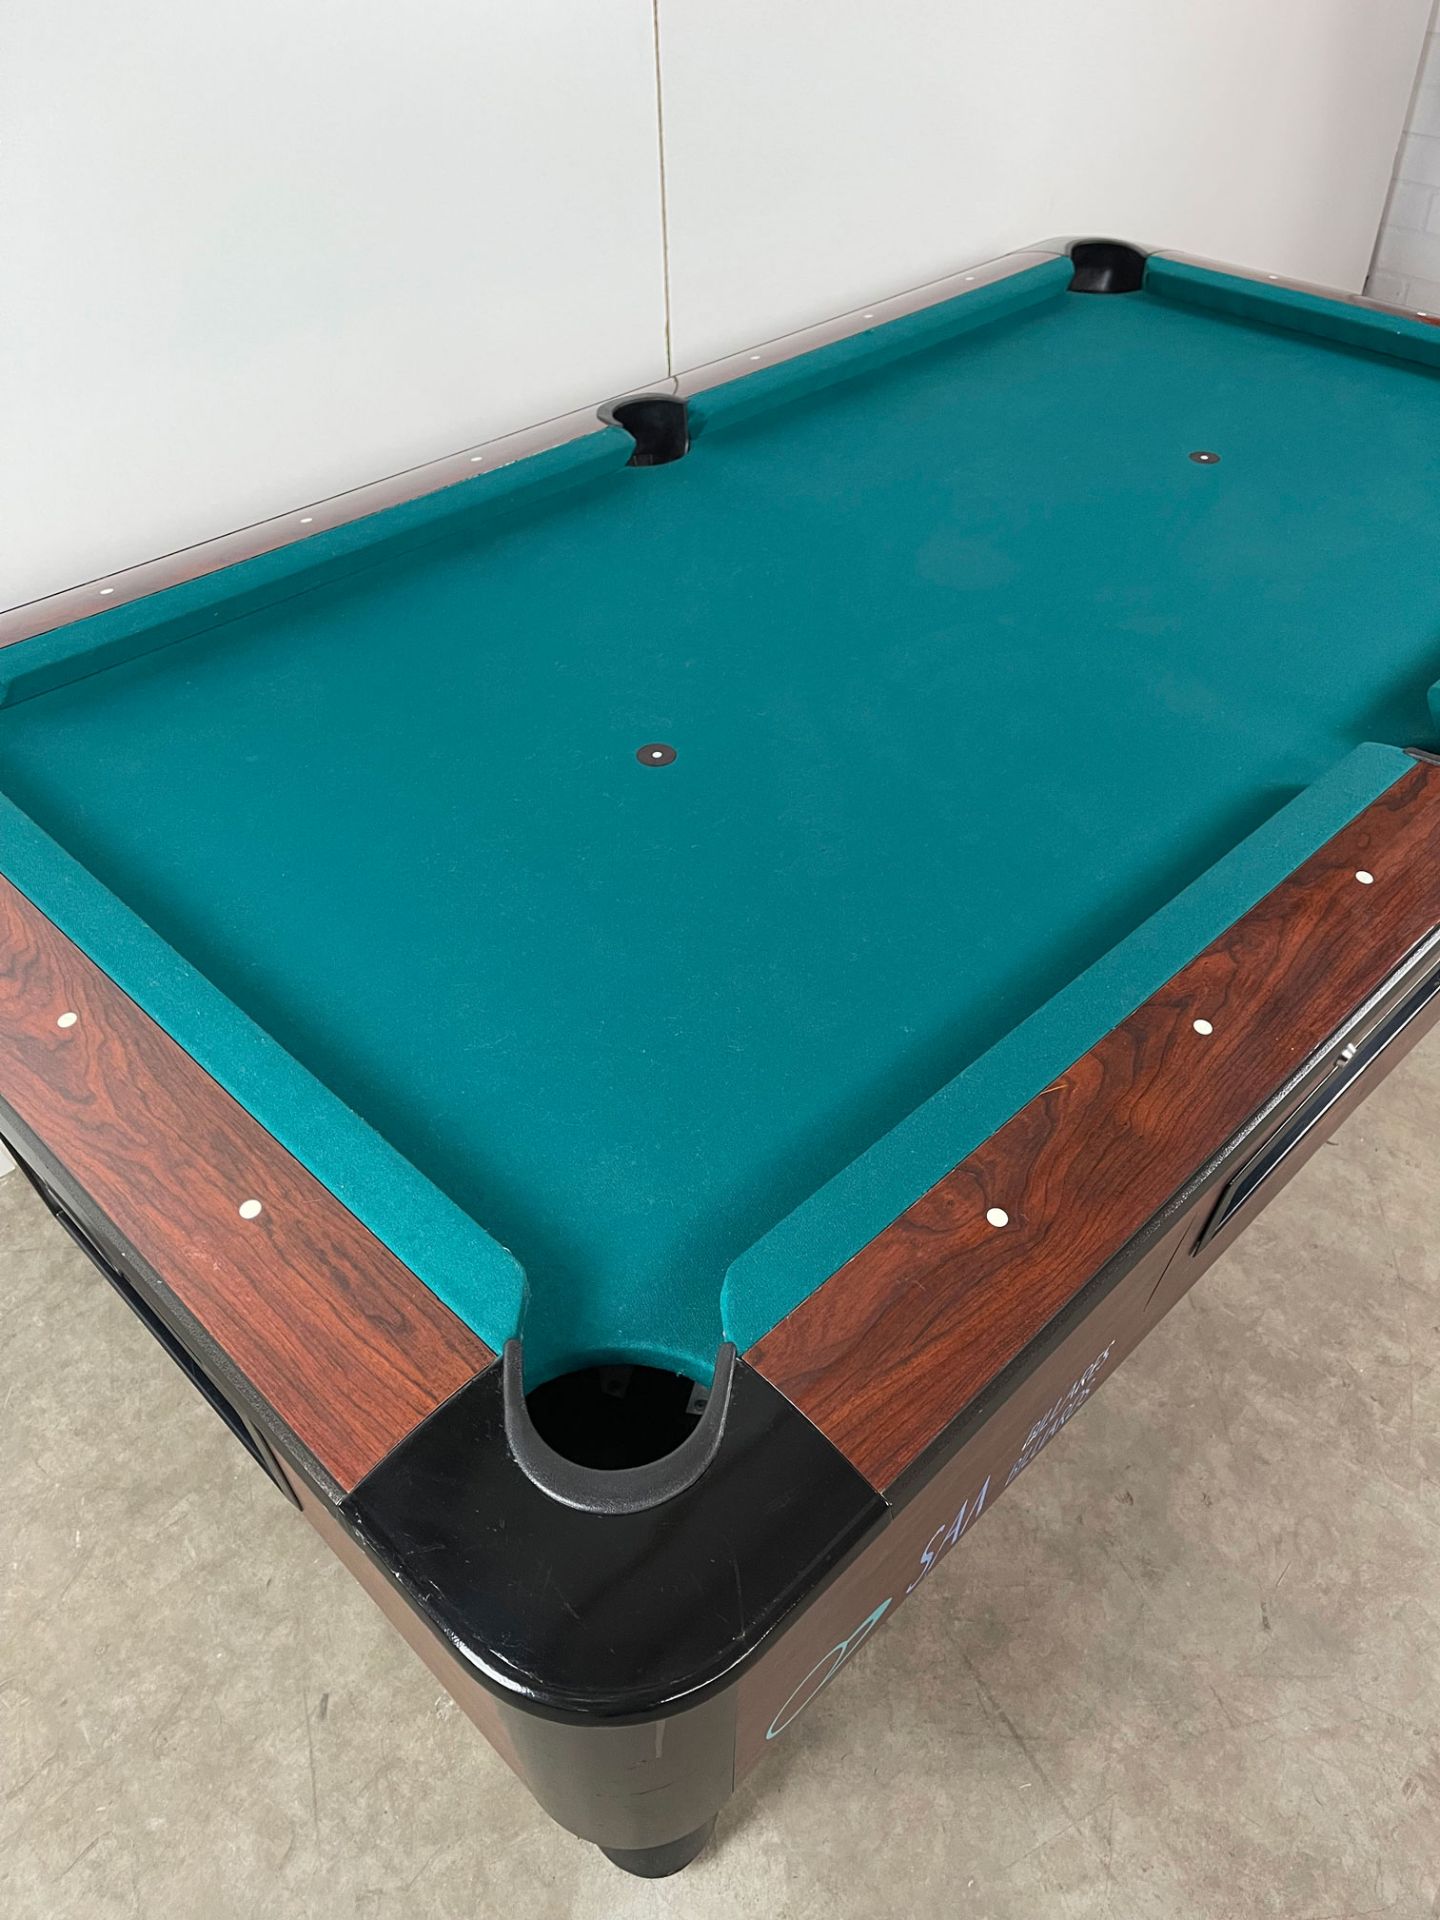 7ft SAM YOWA Coin-Op Billiards Table - Image 8 of 16